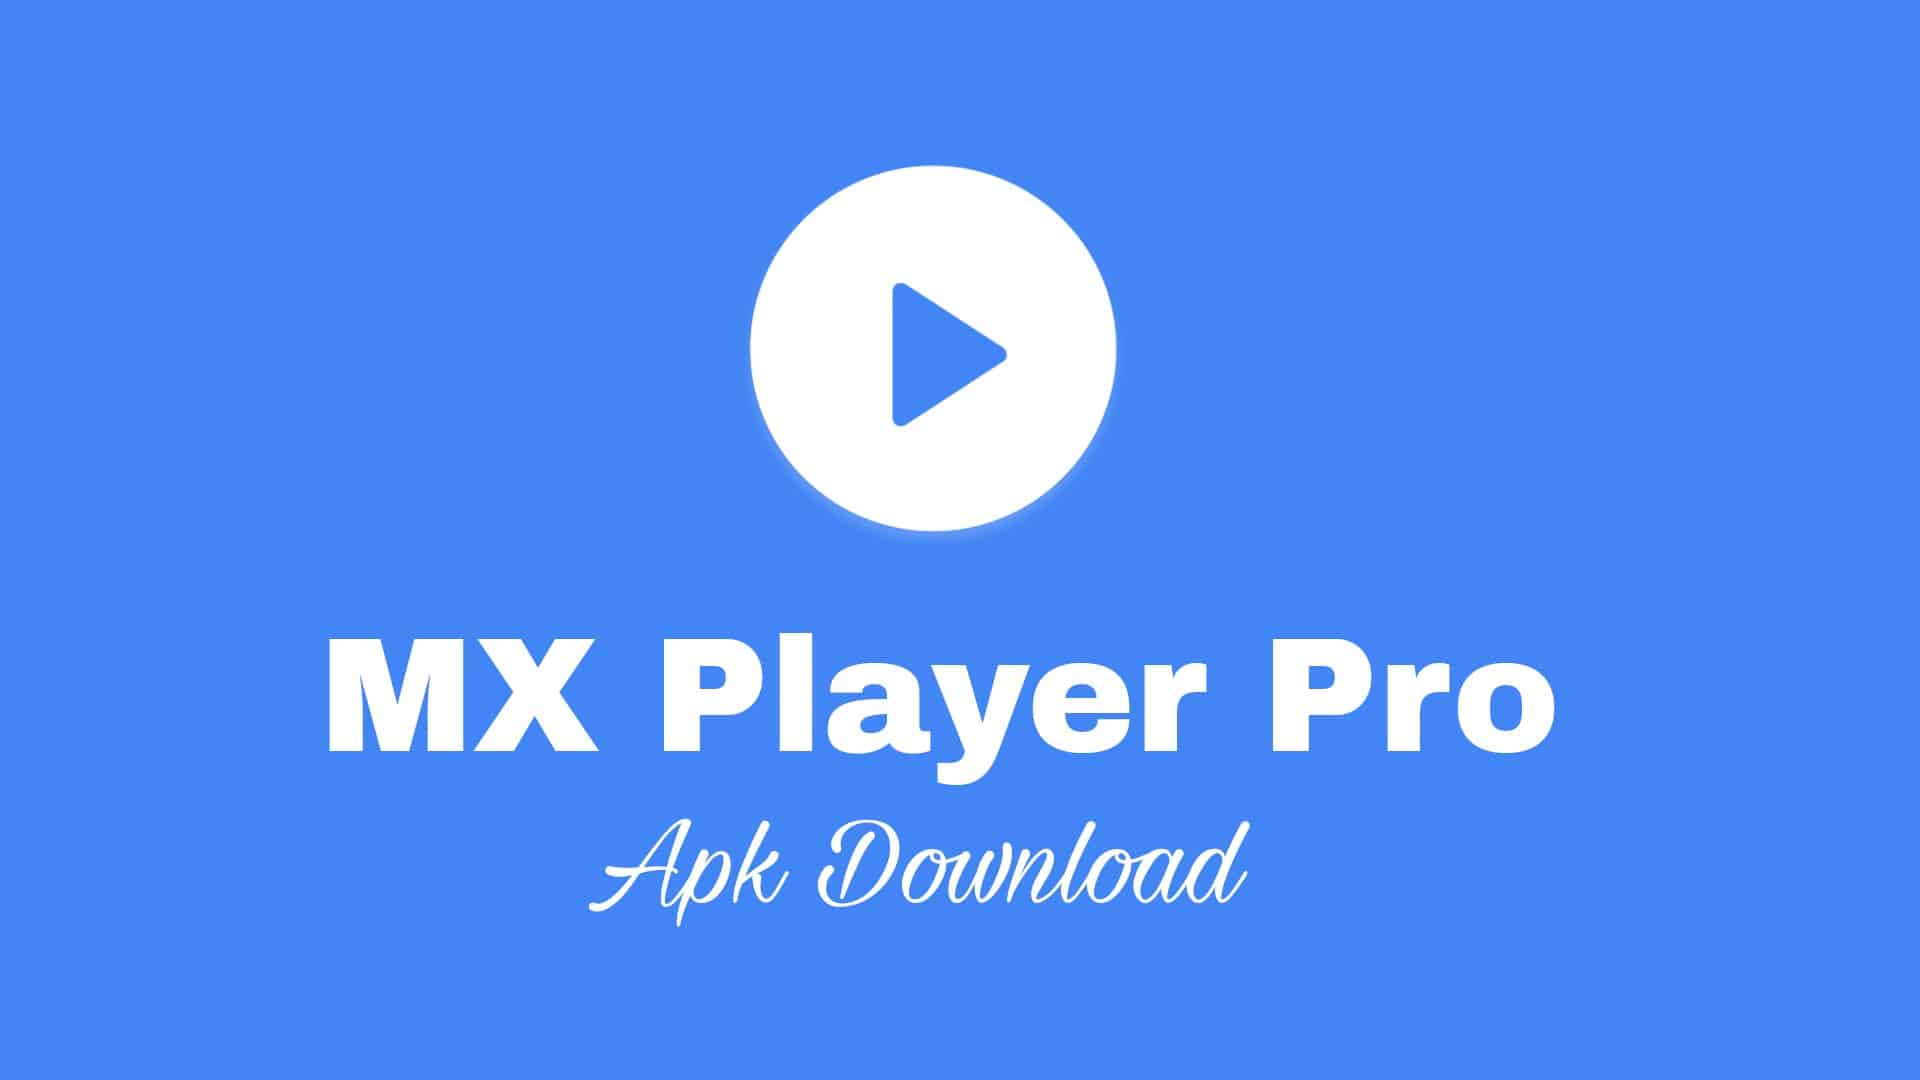 mx player pro cracked apk download